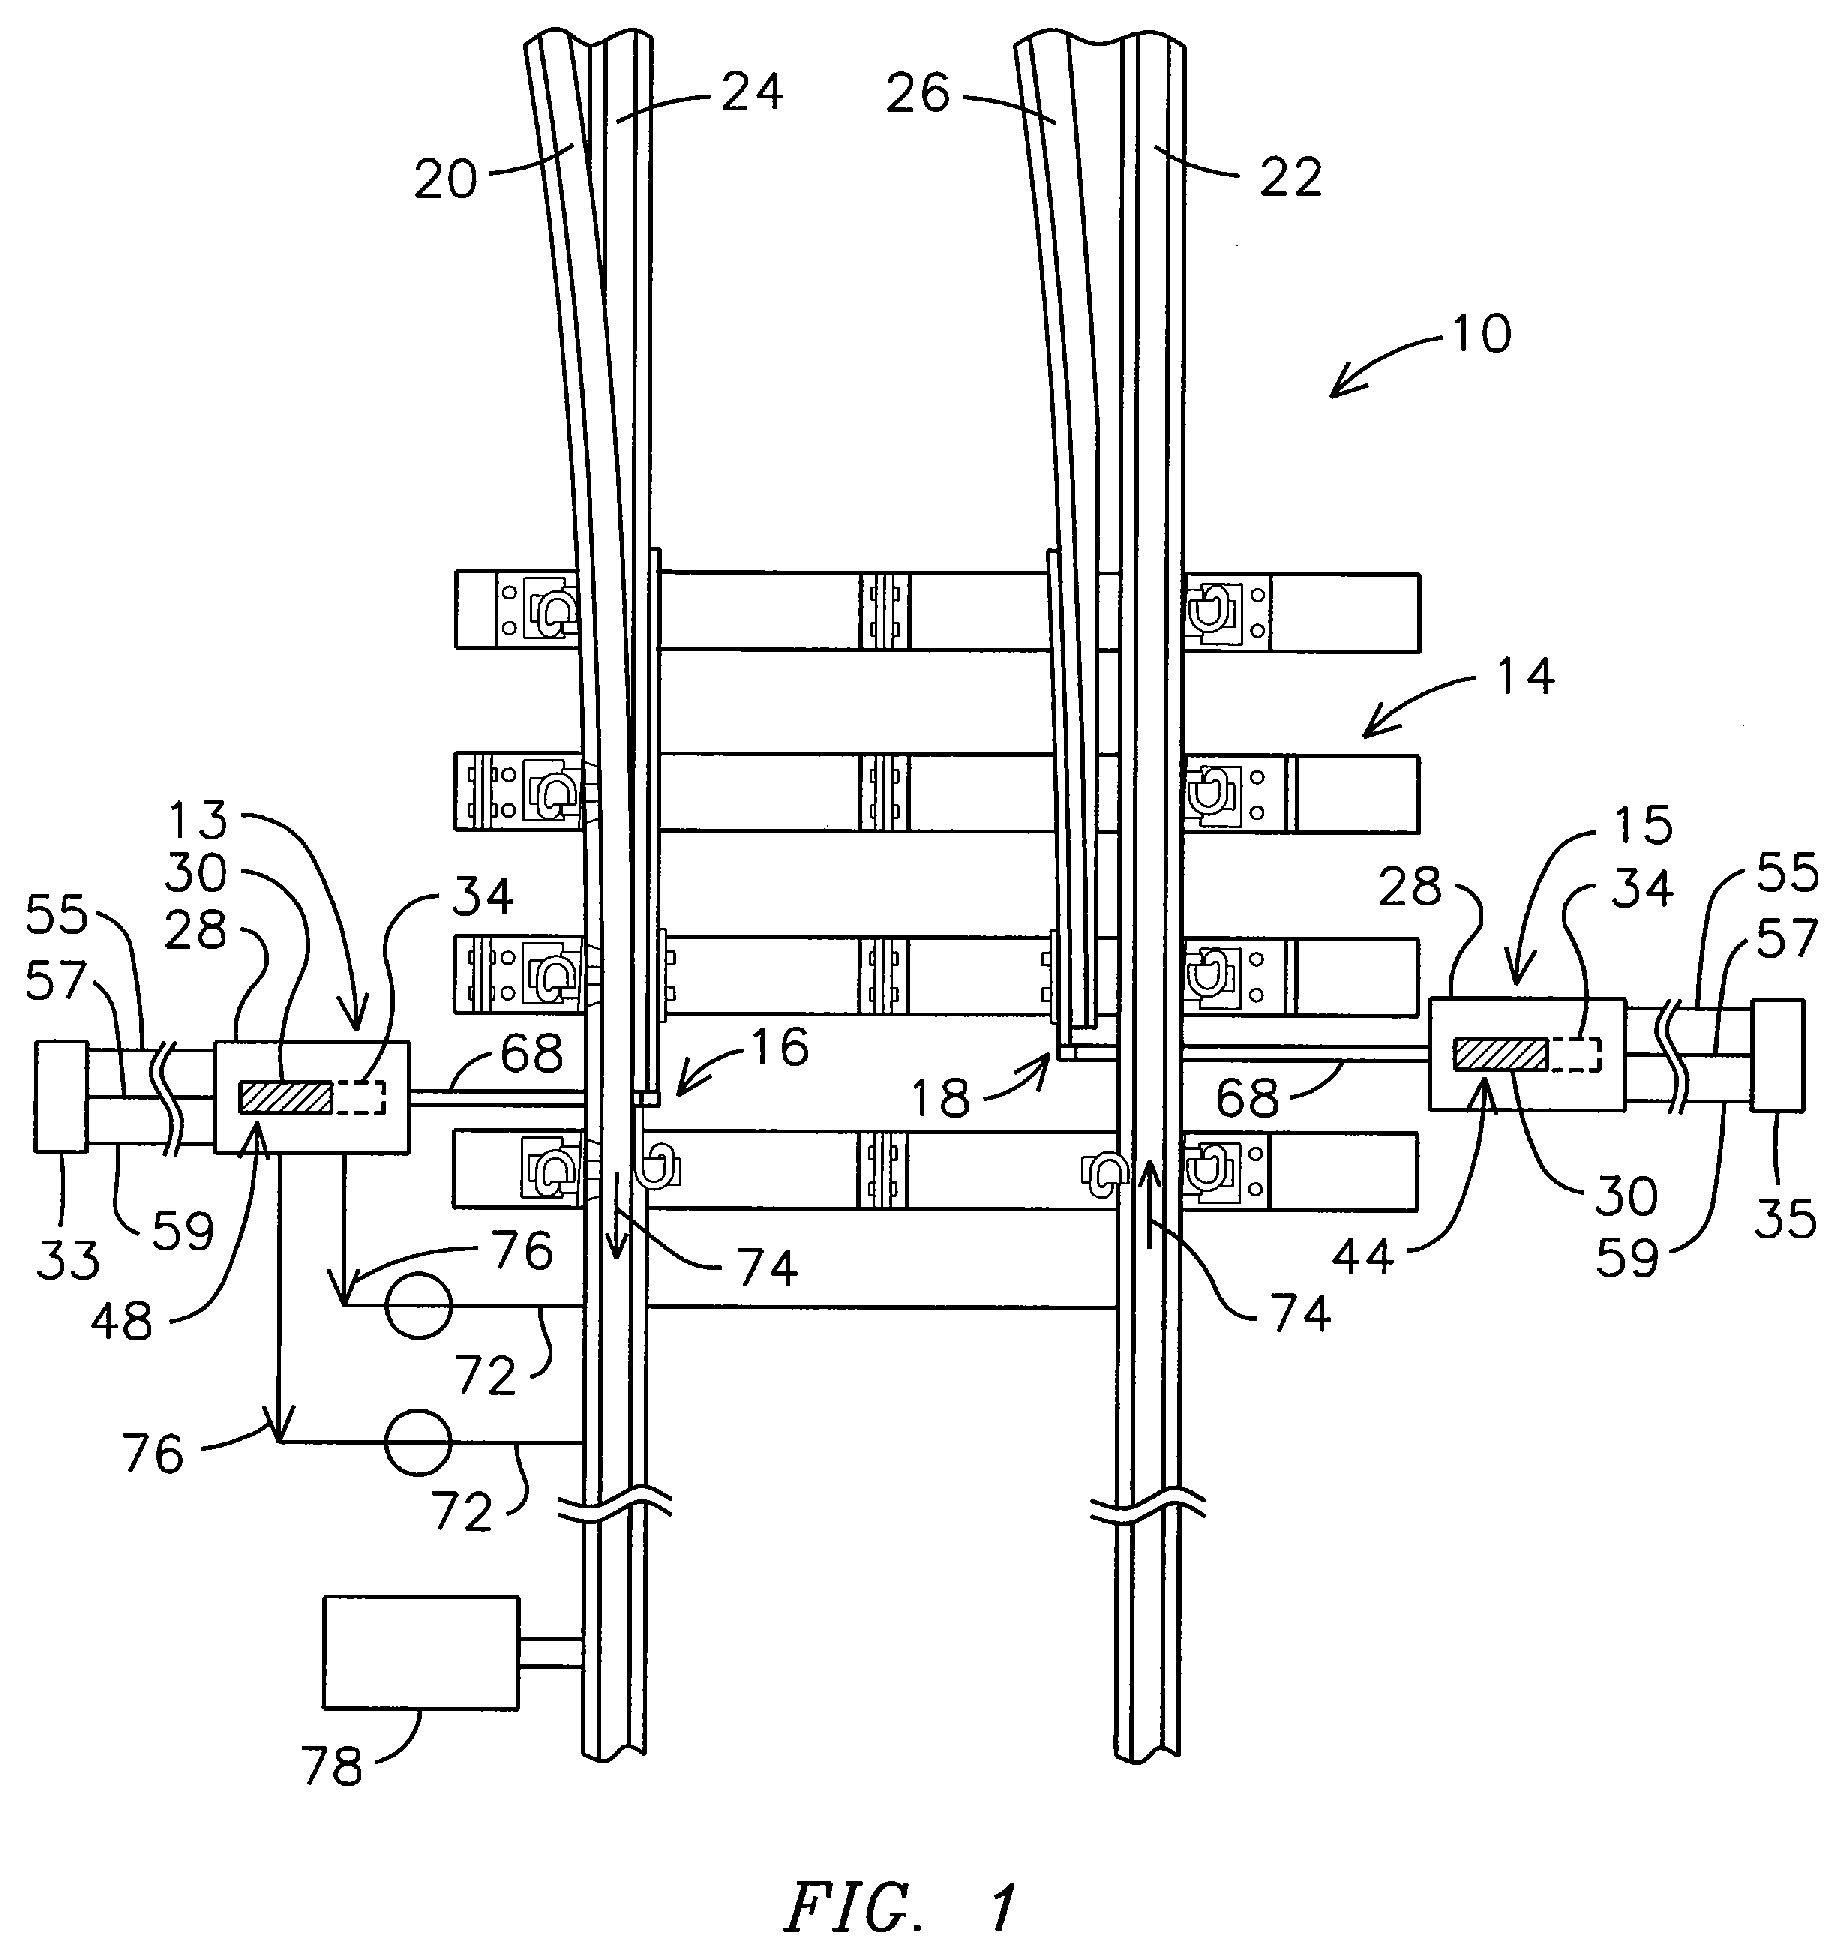 System and Method for Temporary Protection Operation of a Controller Box for a Railroad Switch Turnout